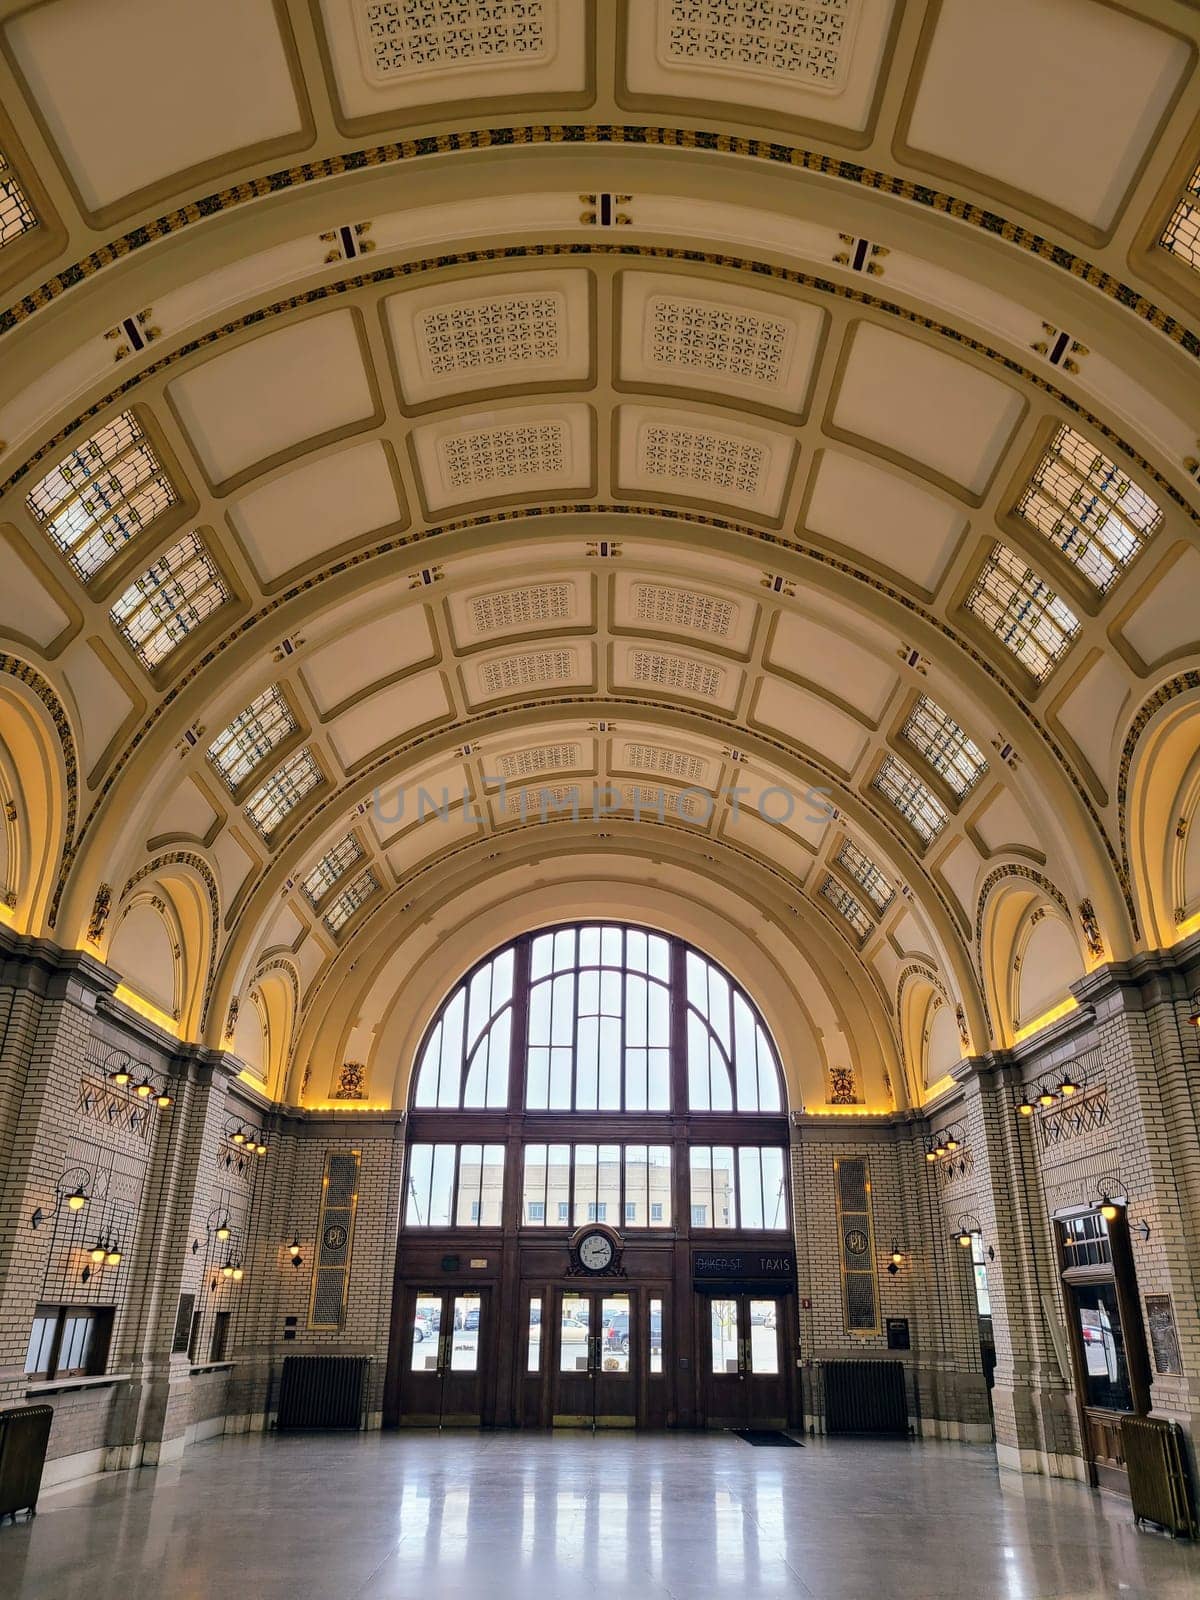 Elegant historic train station in Fort Wayne, Indiana featuring ornate arches, a grand clock, and sunlit interiors.